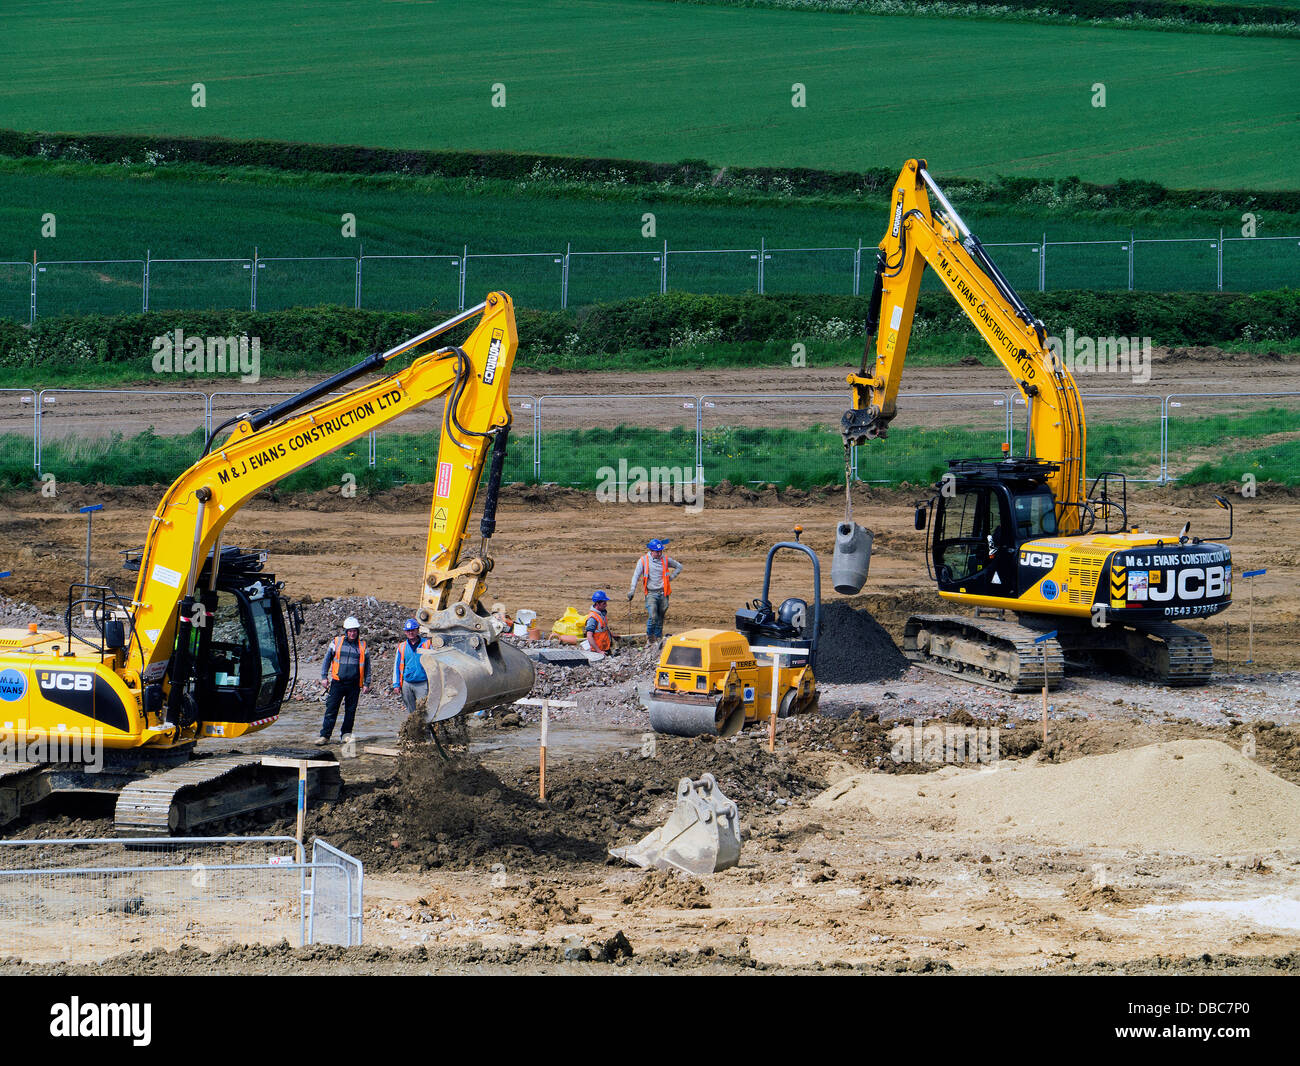 Diggers preparing land for house building, Grantham, Lincs, England Stock Photo